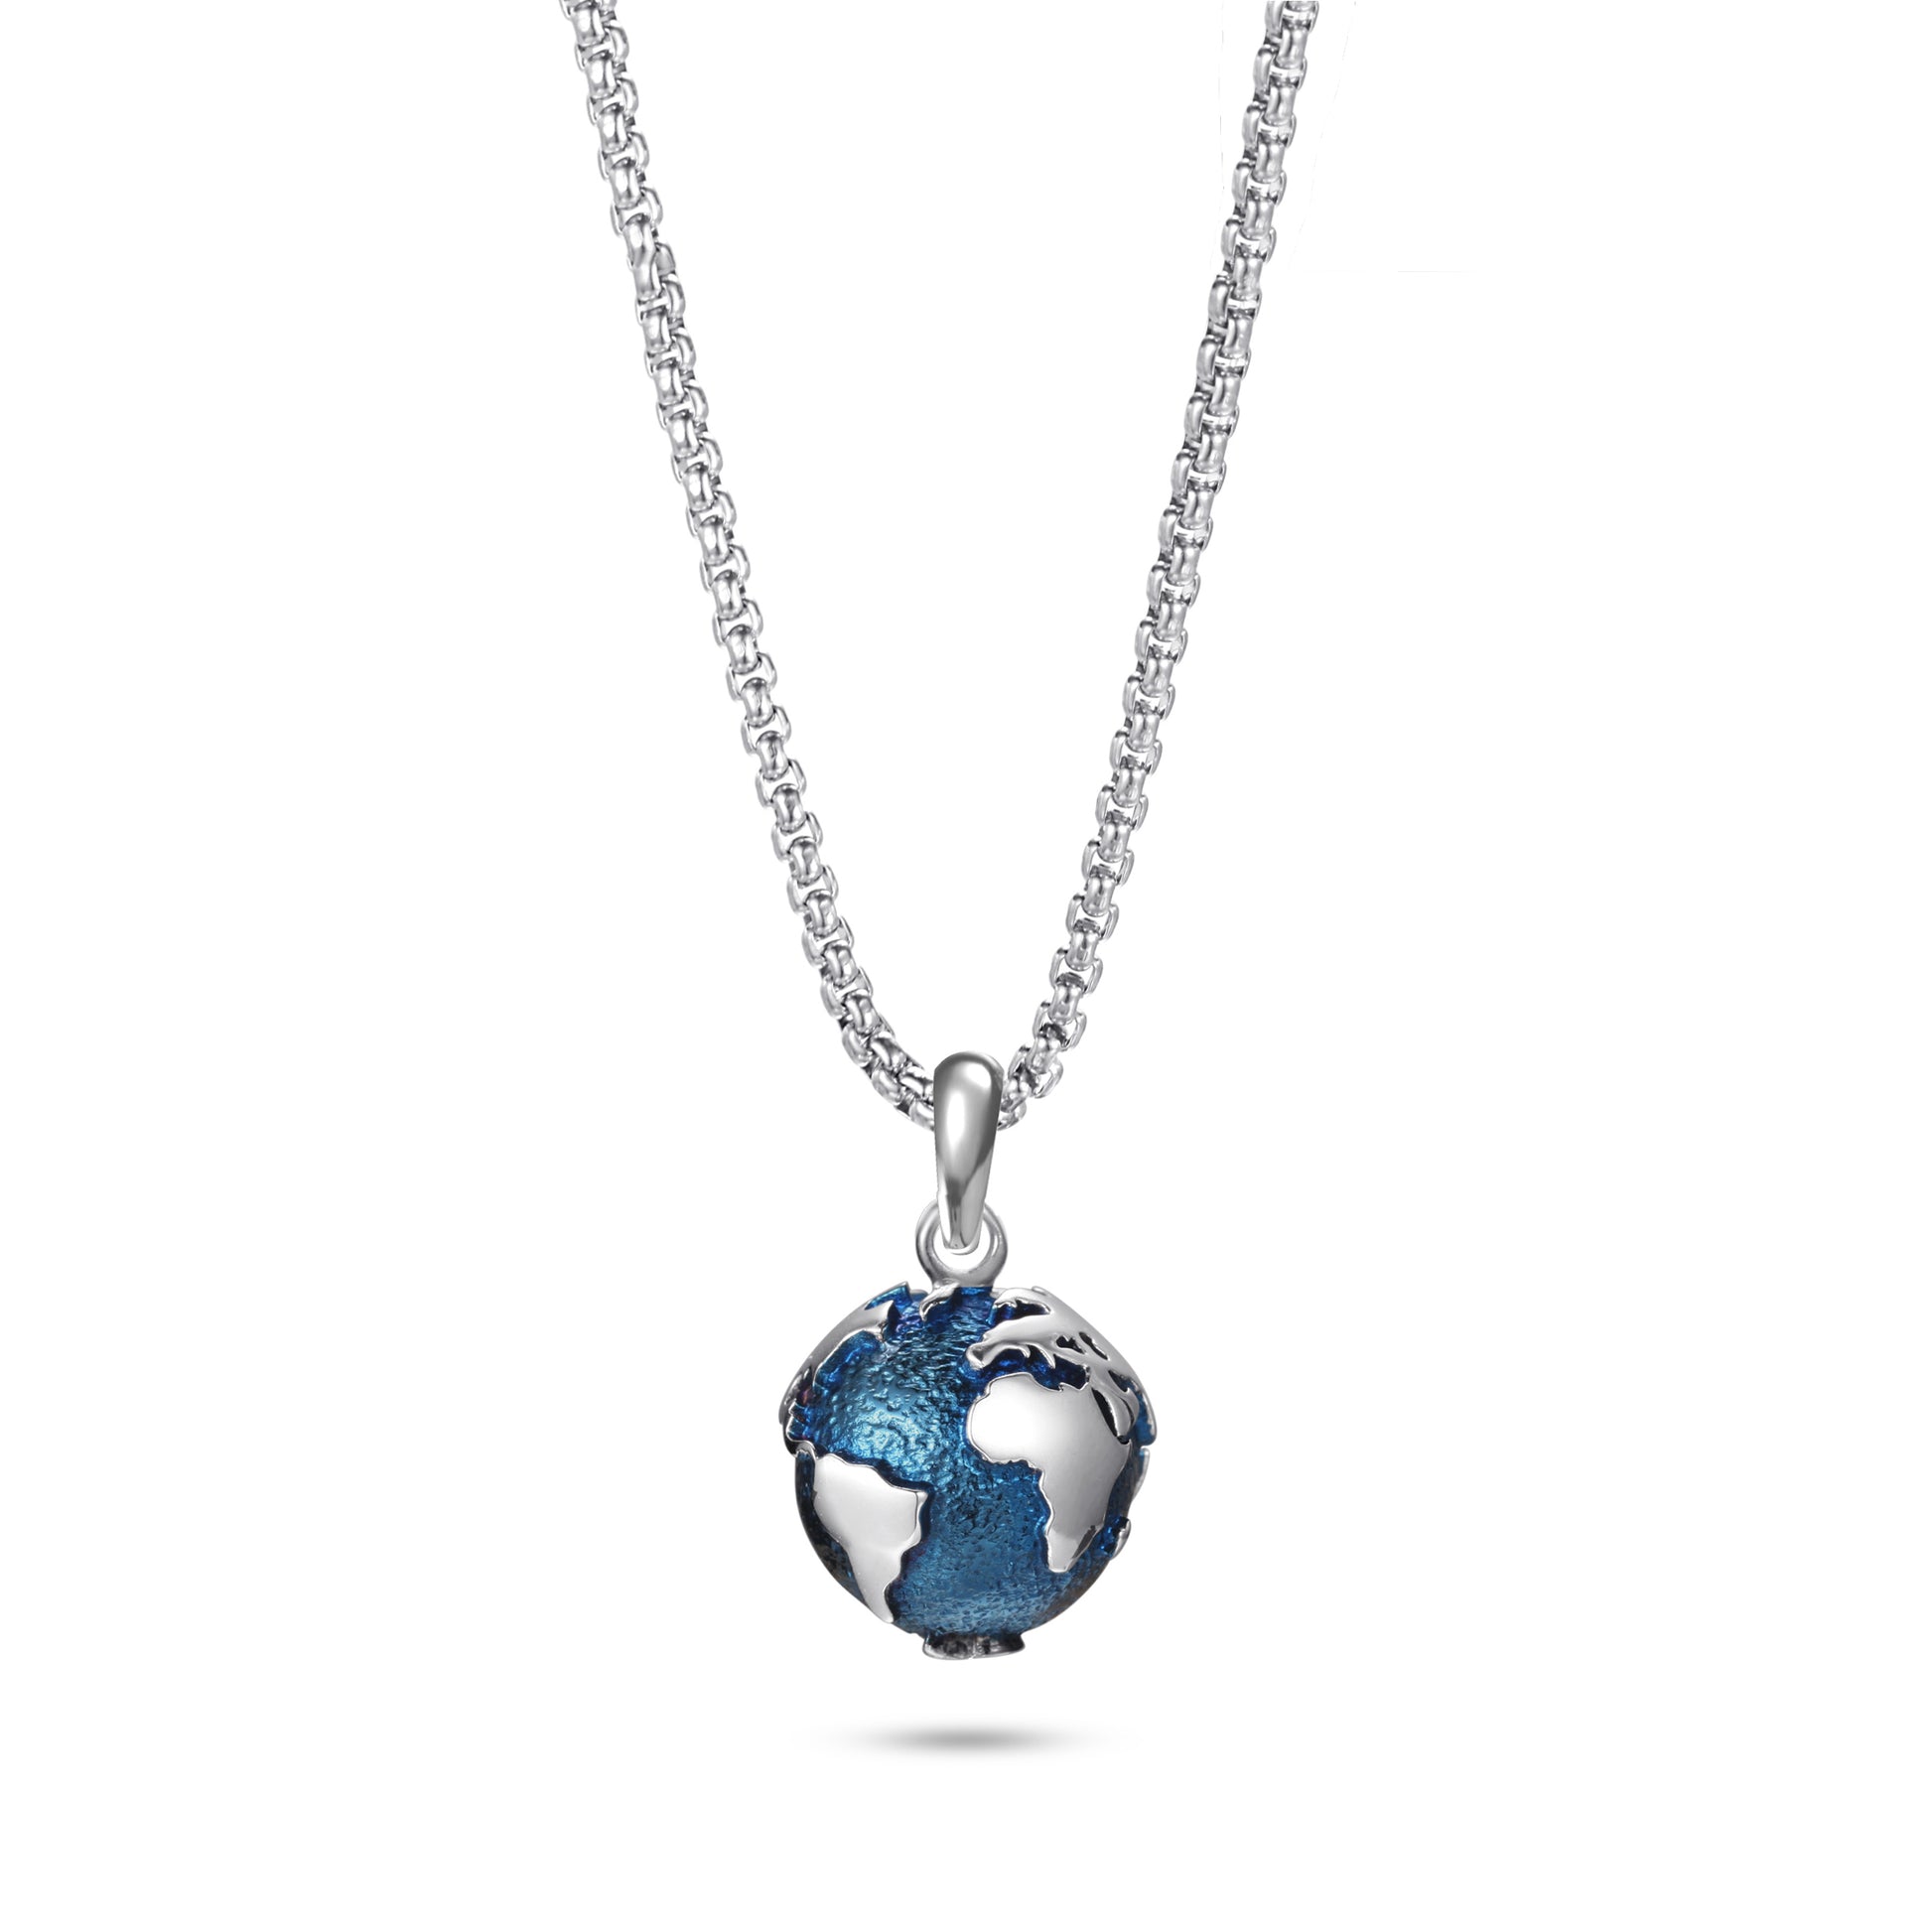 KINGKA Stainless Steel Necklace, Silver Blue, The Earth - KINGKA Jewelry